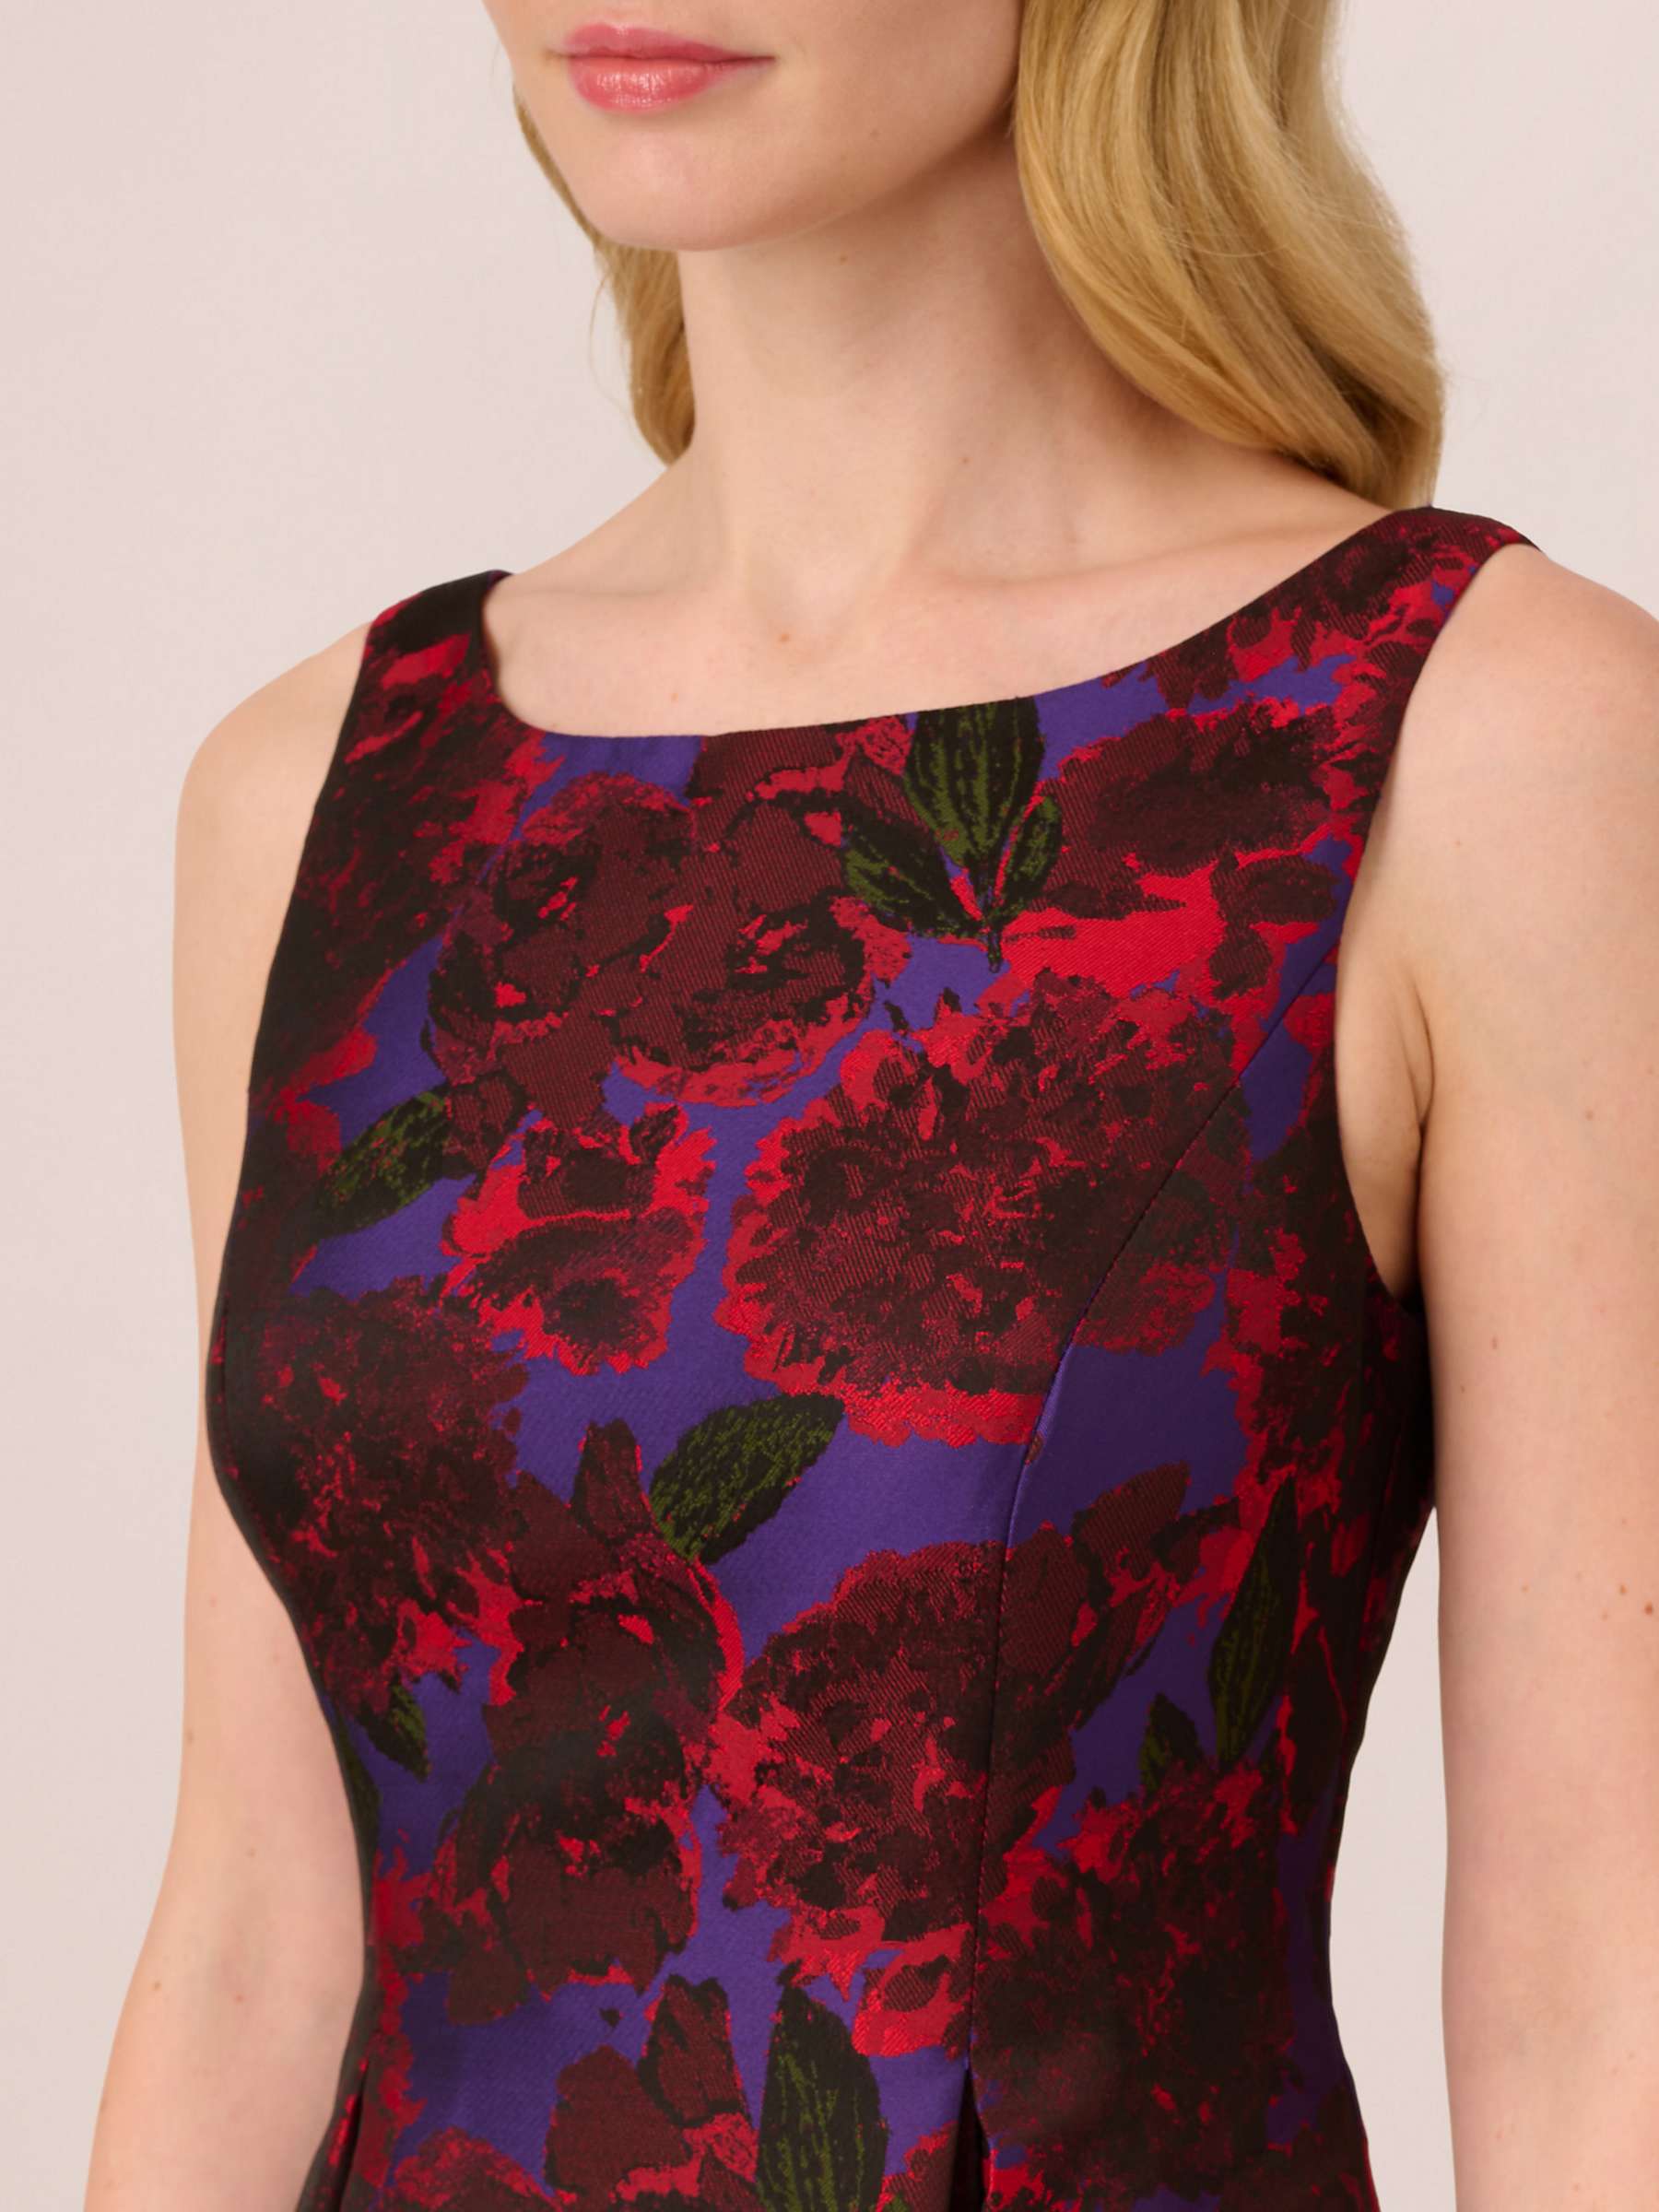 Buy Adrianna Papell Jacquard Tea Dress, Red/Multi Online at johnlewis.com